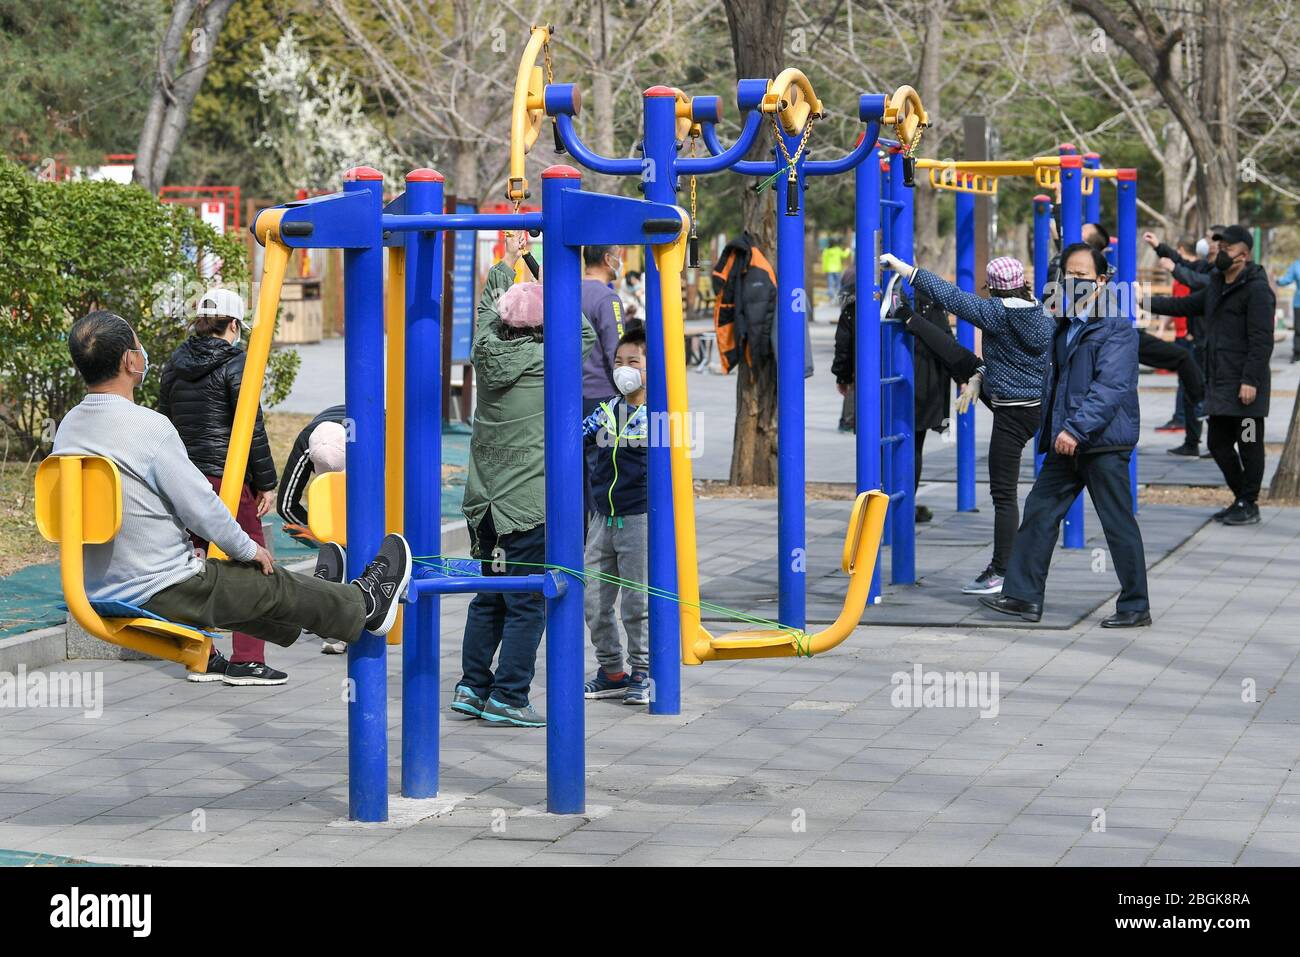 https://c8.alamy.com/comp/2BGK8RA/citizens-do-exercise-by-jogging-or-with-fitness-equipment-at-a-local-park-as-weather-warms-up-beijing-china-12-march-2020-local-caption-fa-2BGK8RA.jpg